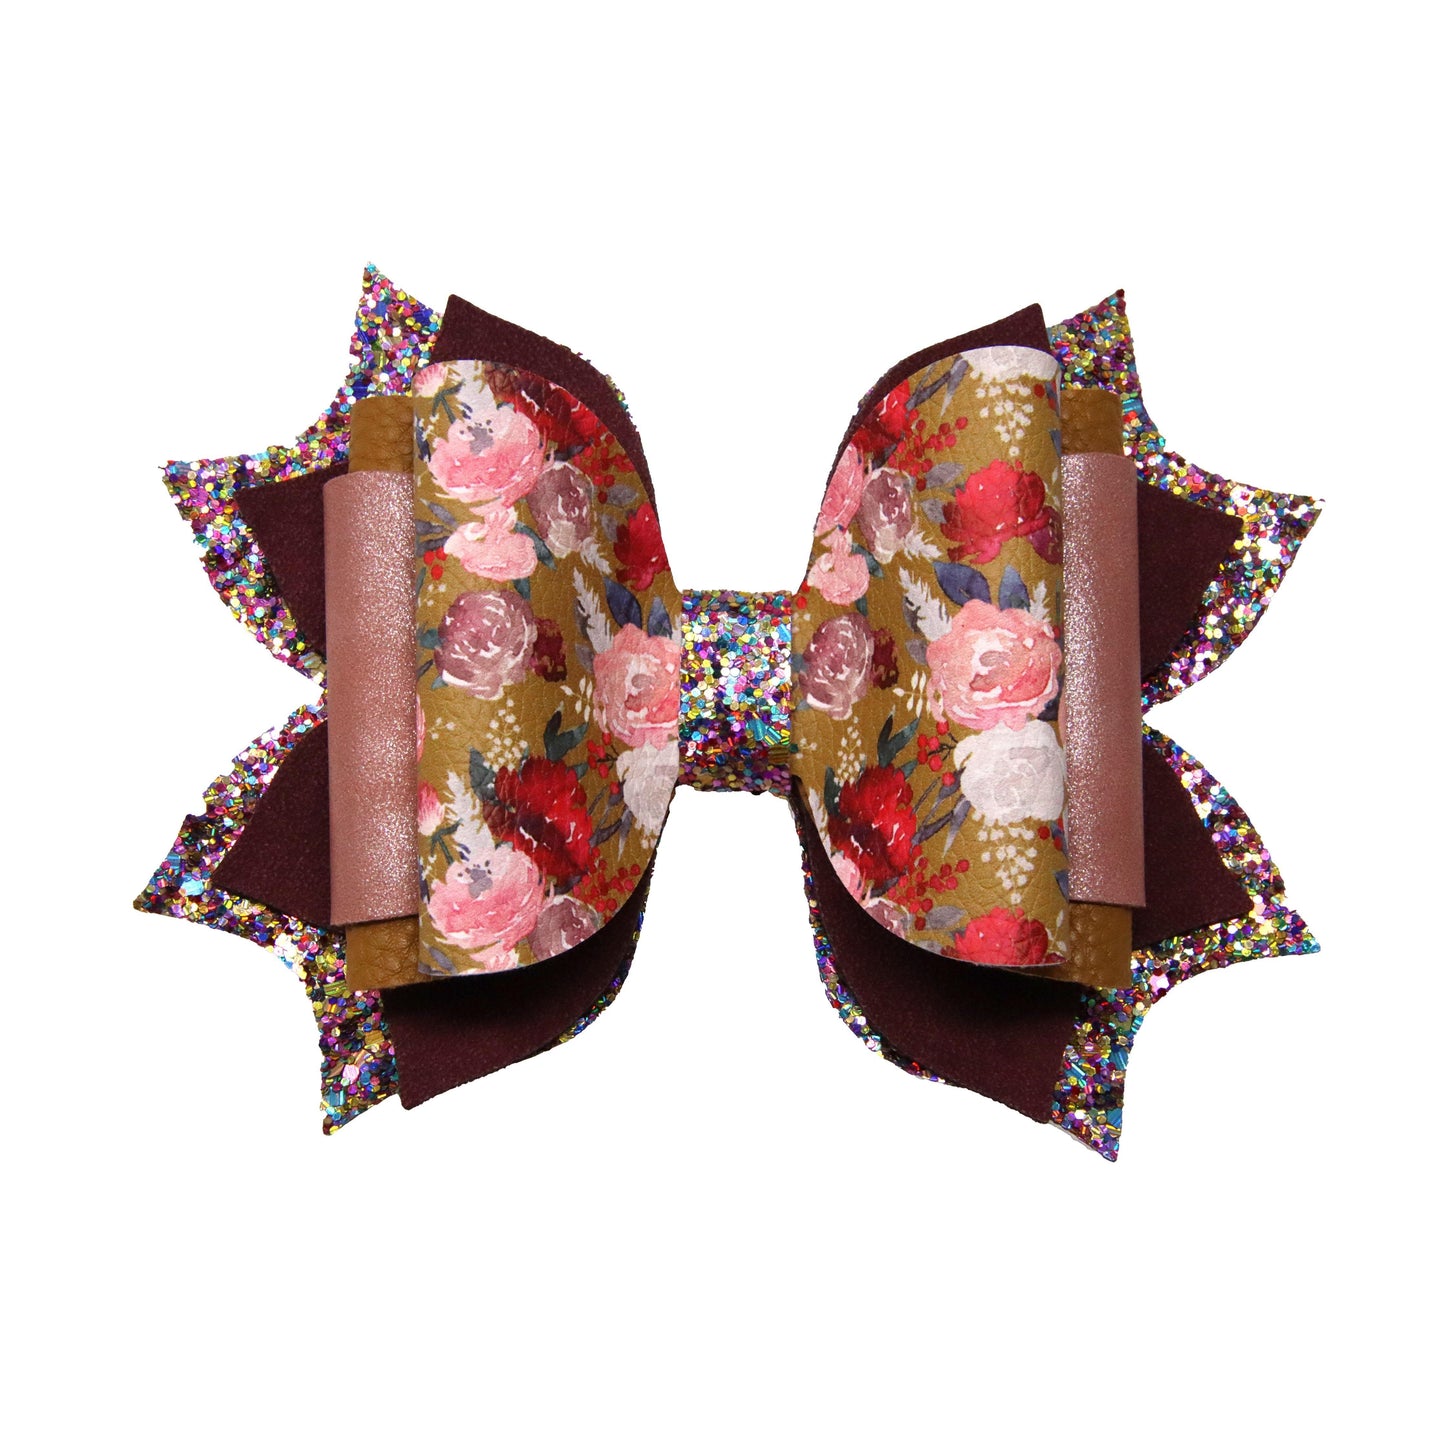 Autumn Floral Dressed-up Exquisite Bow 5.5"